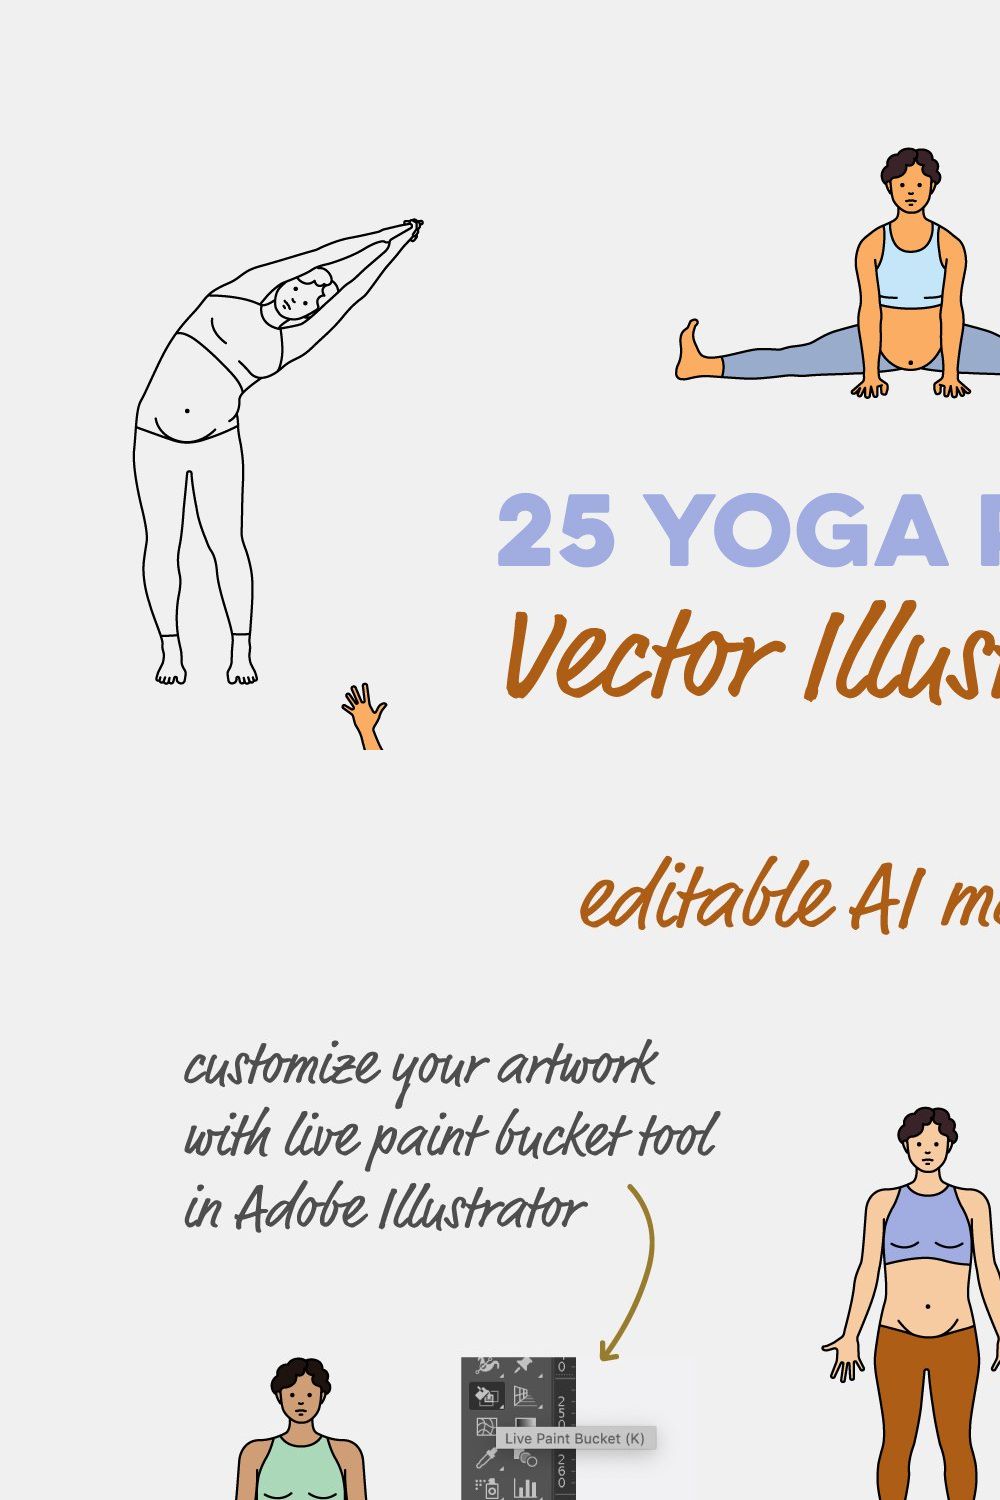 10 Effective Yoga Poses for Bodybuilders (Complete Guide)